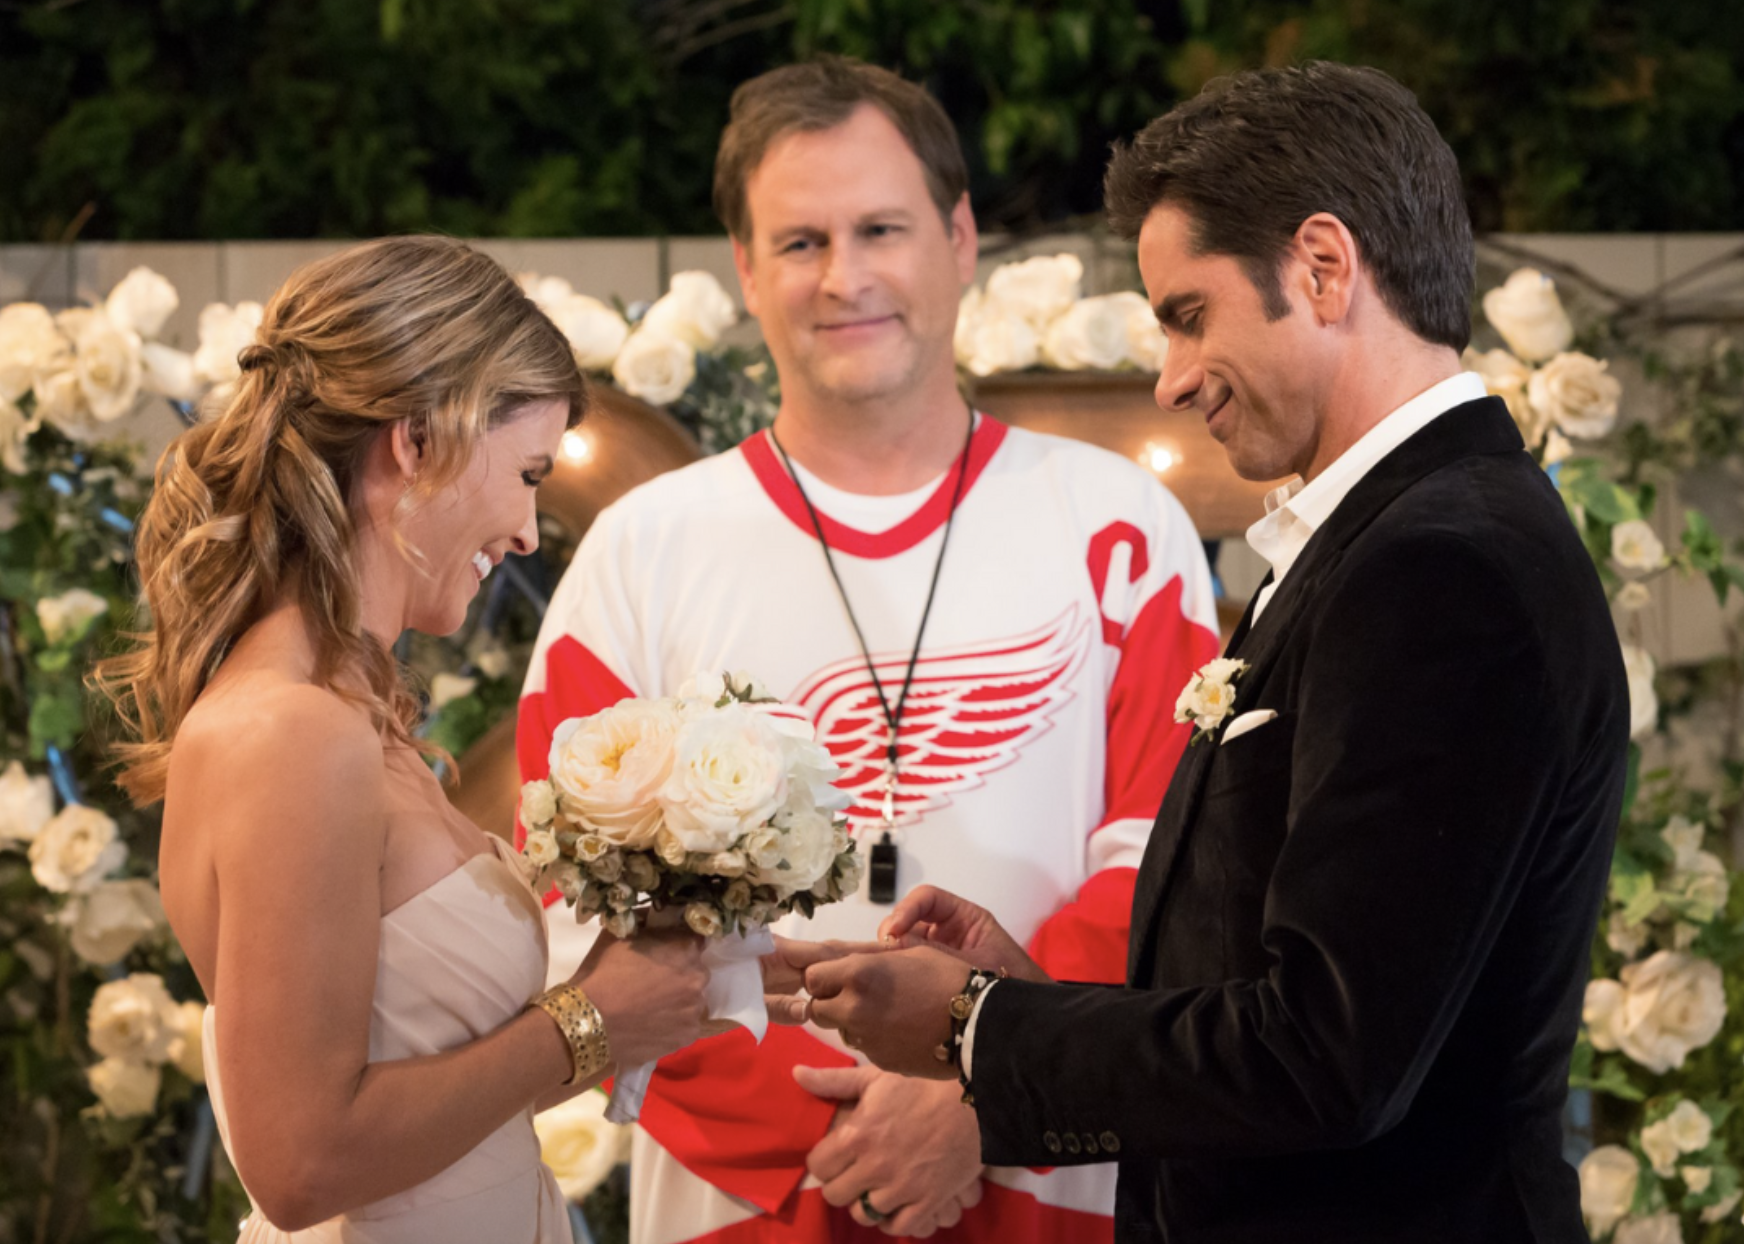 John Stamos, Dave Coulier, and Lori Loughlin in Fuller House (2016)